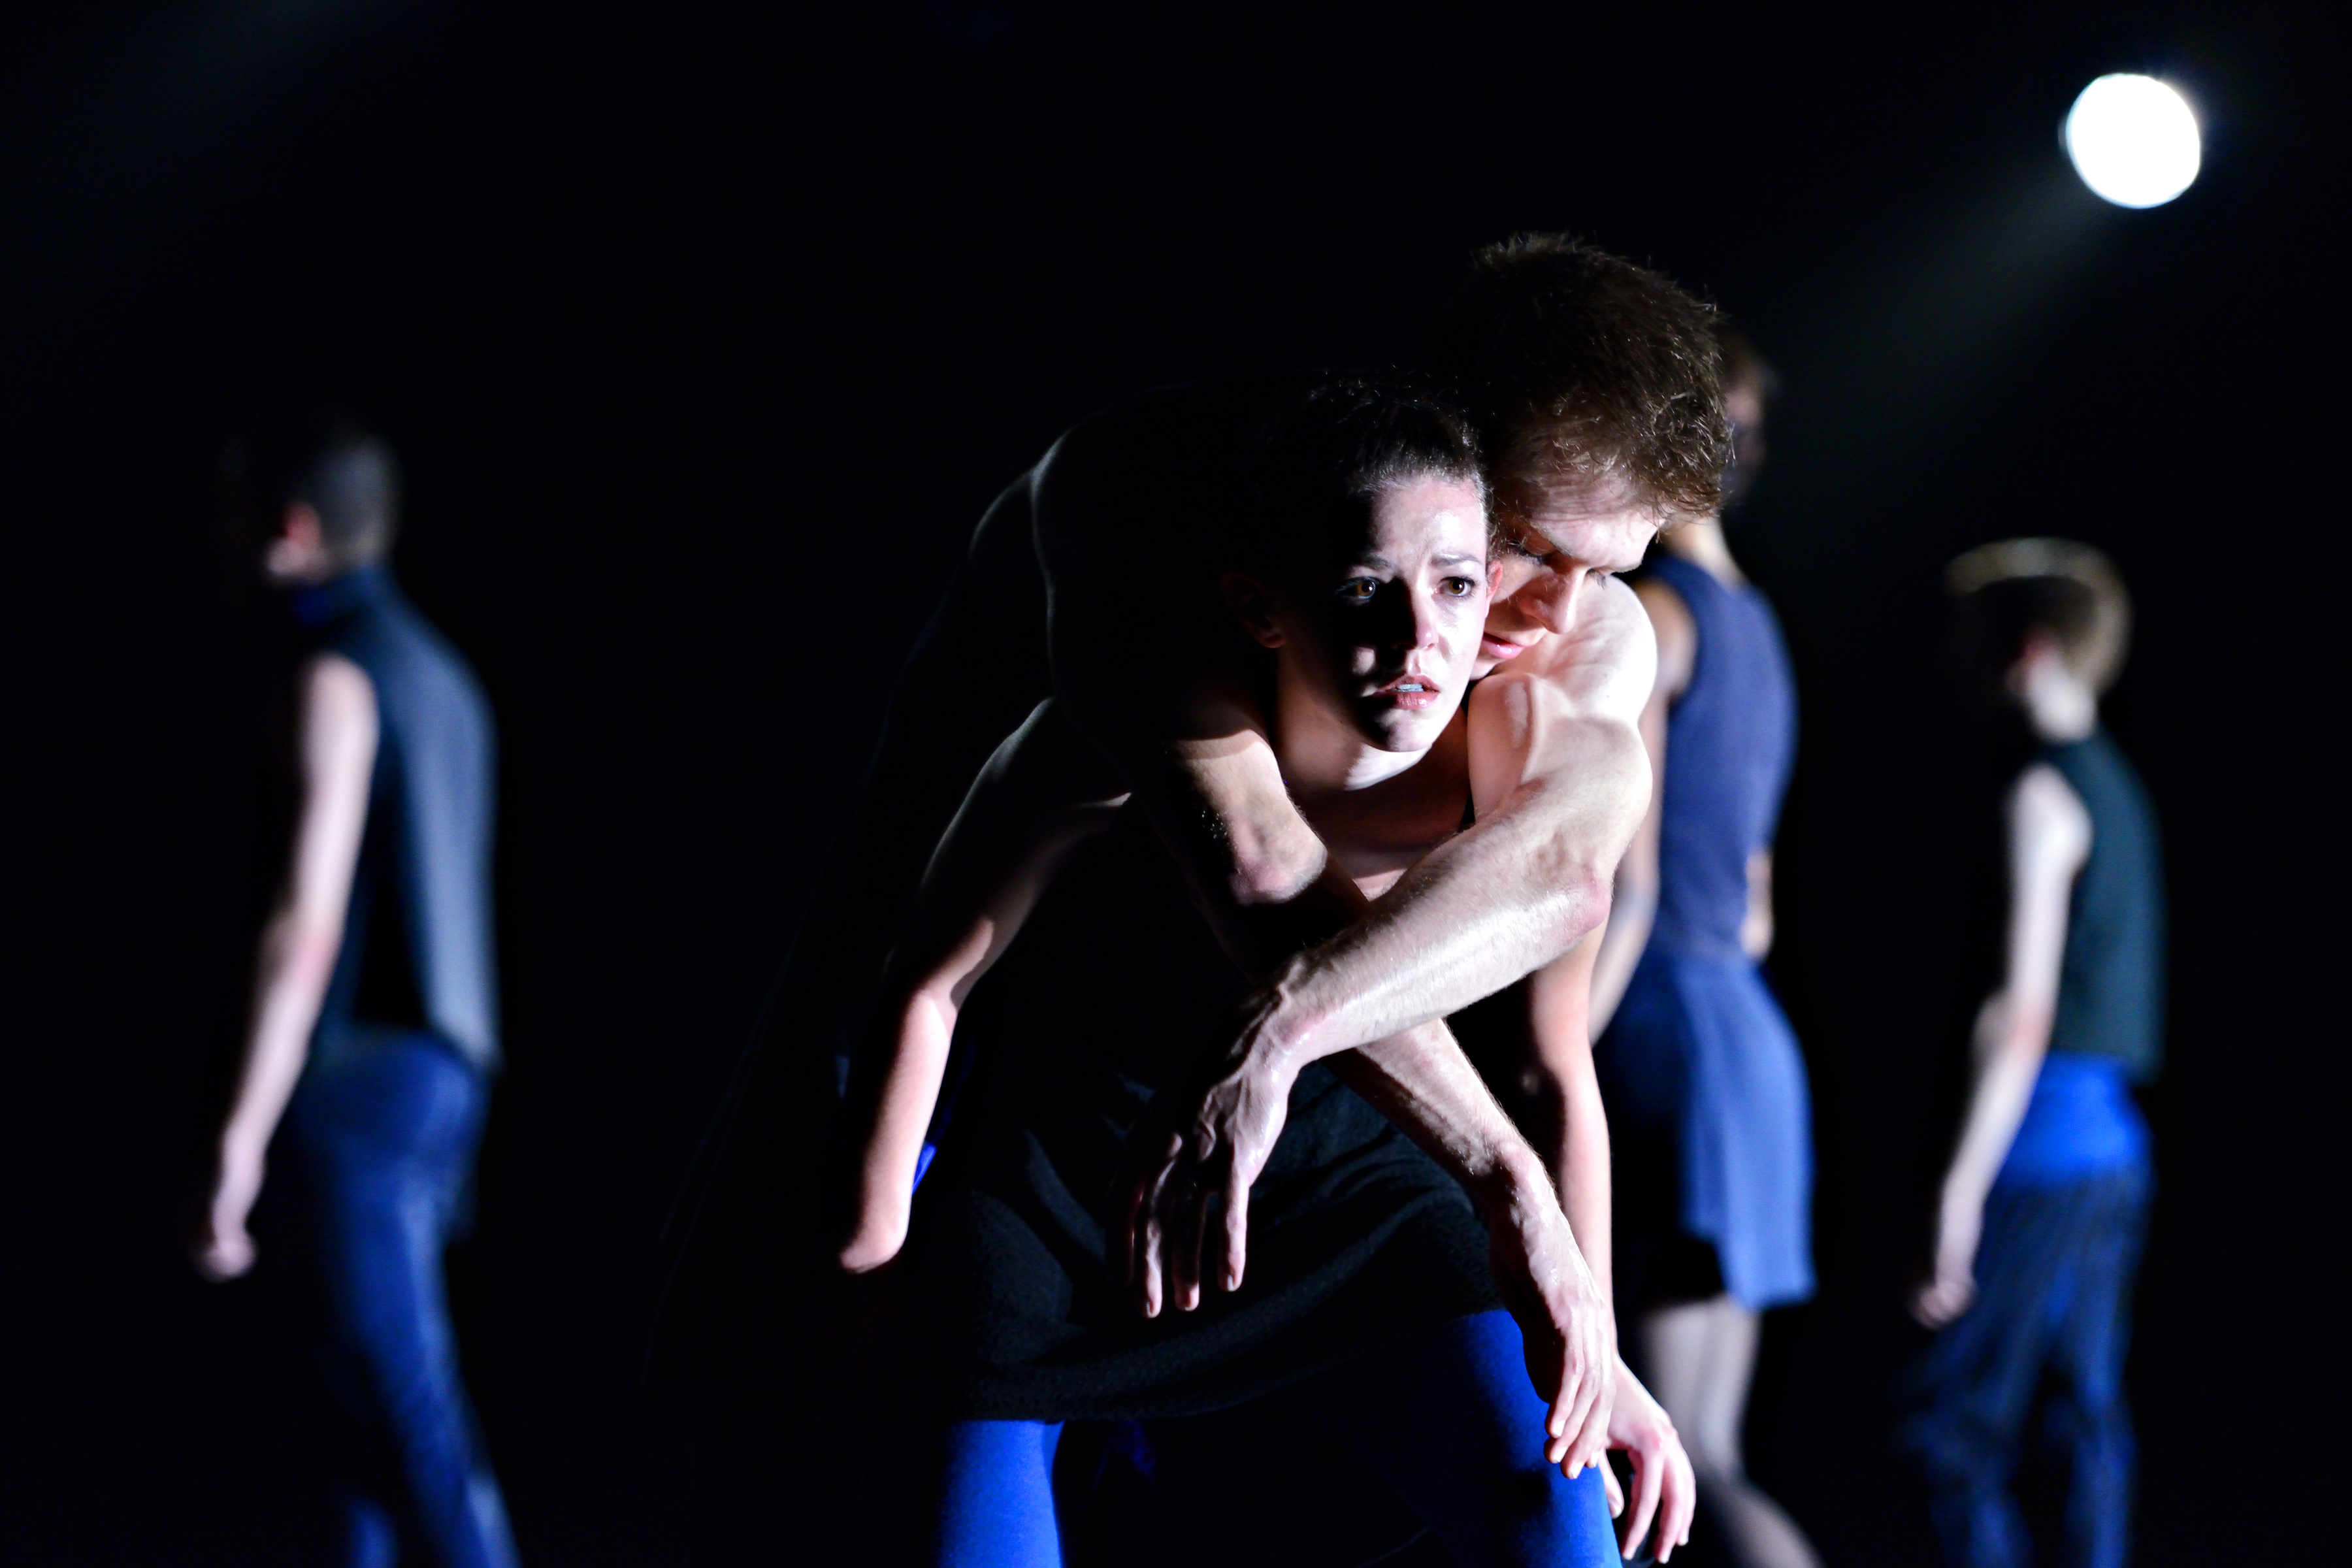 Dancers Emily Chessa and Scott Fowler in An Instant.  Photo by Michael Slobodian